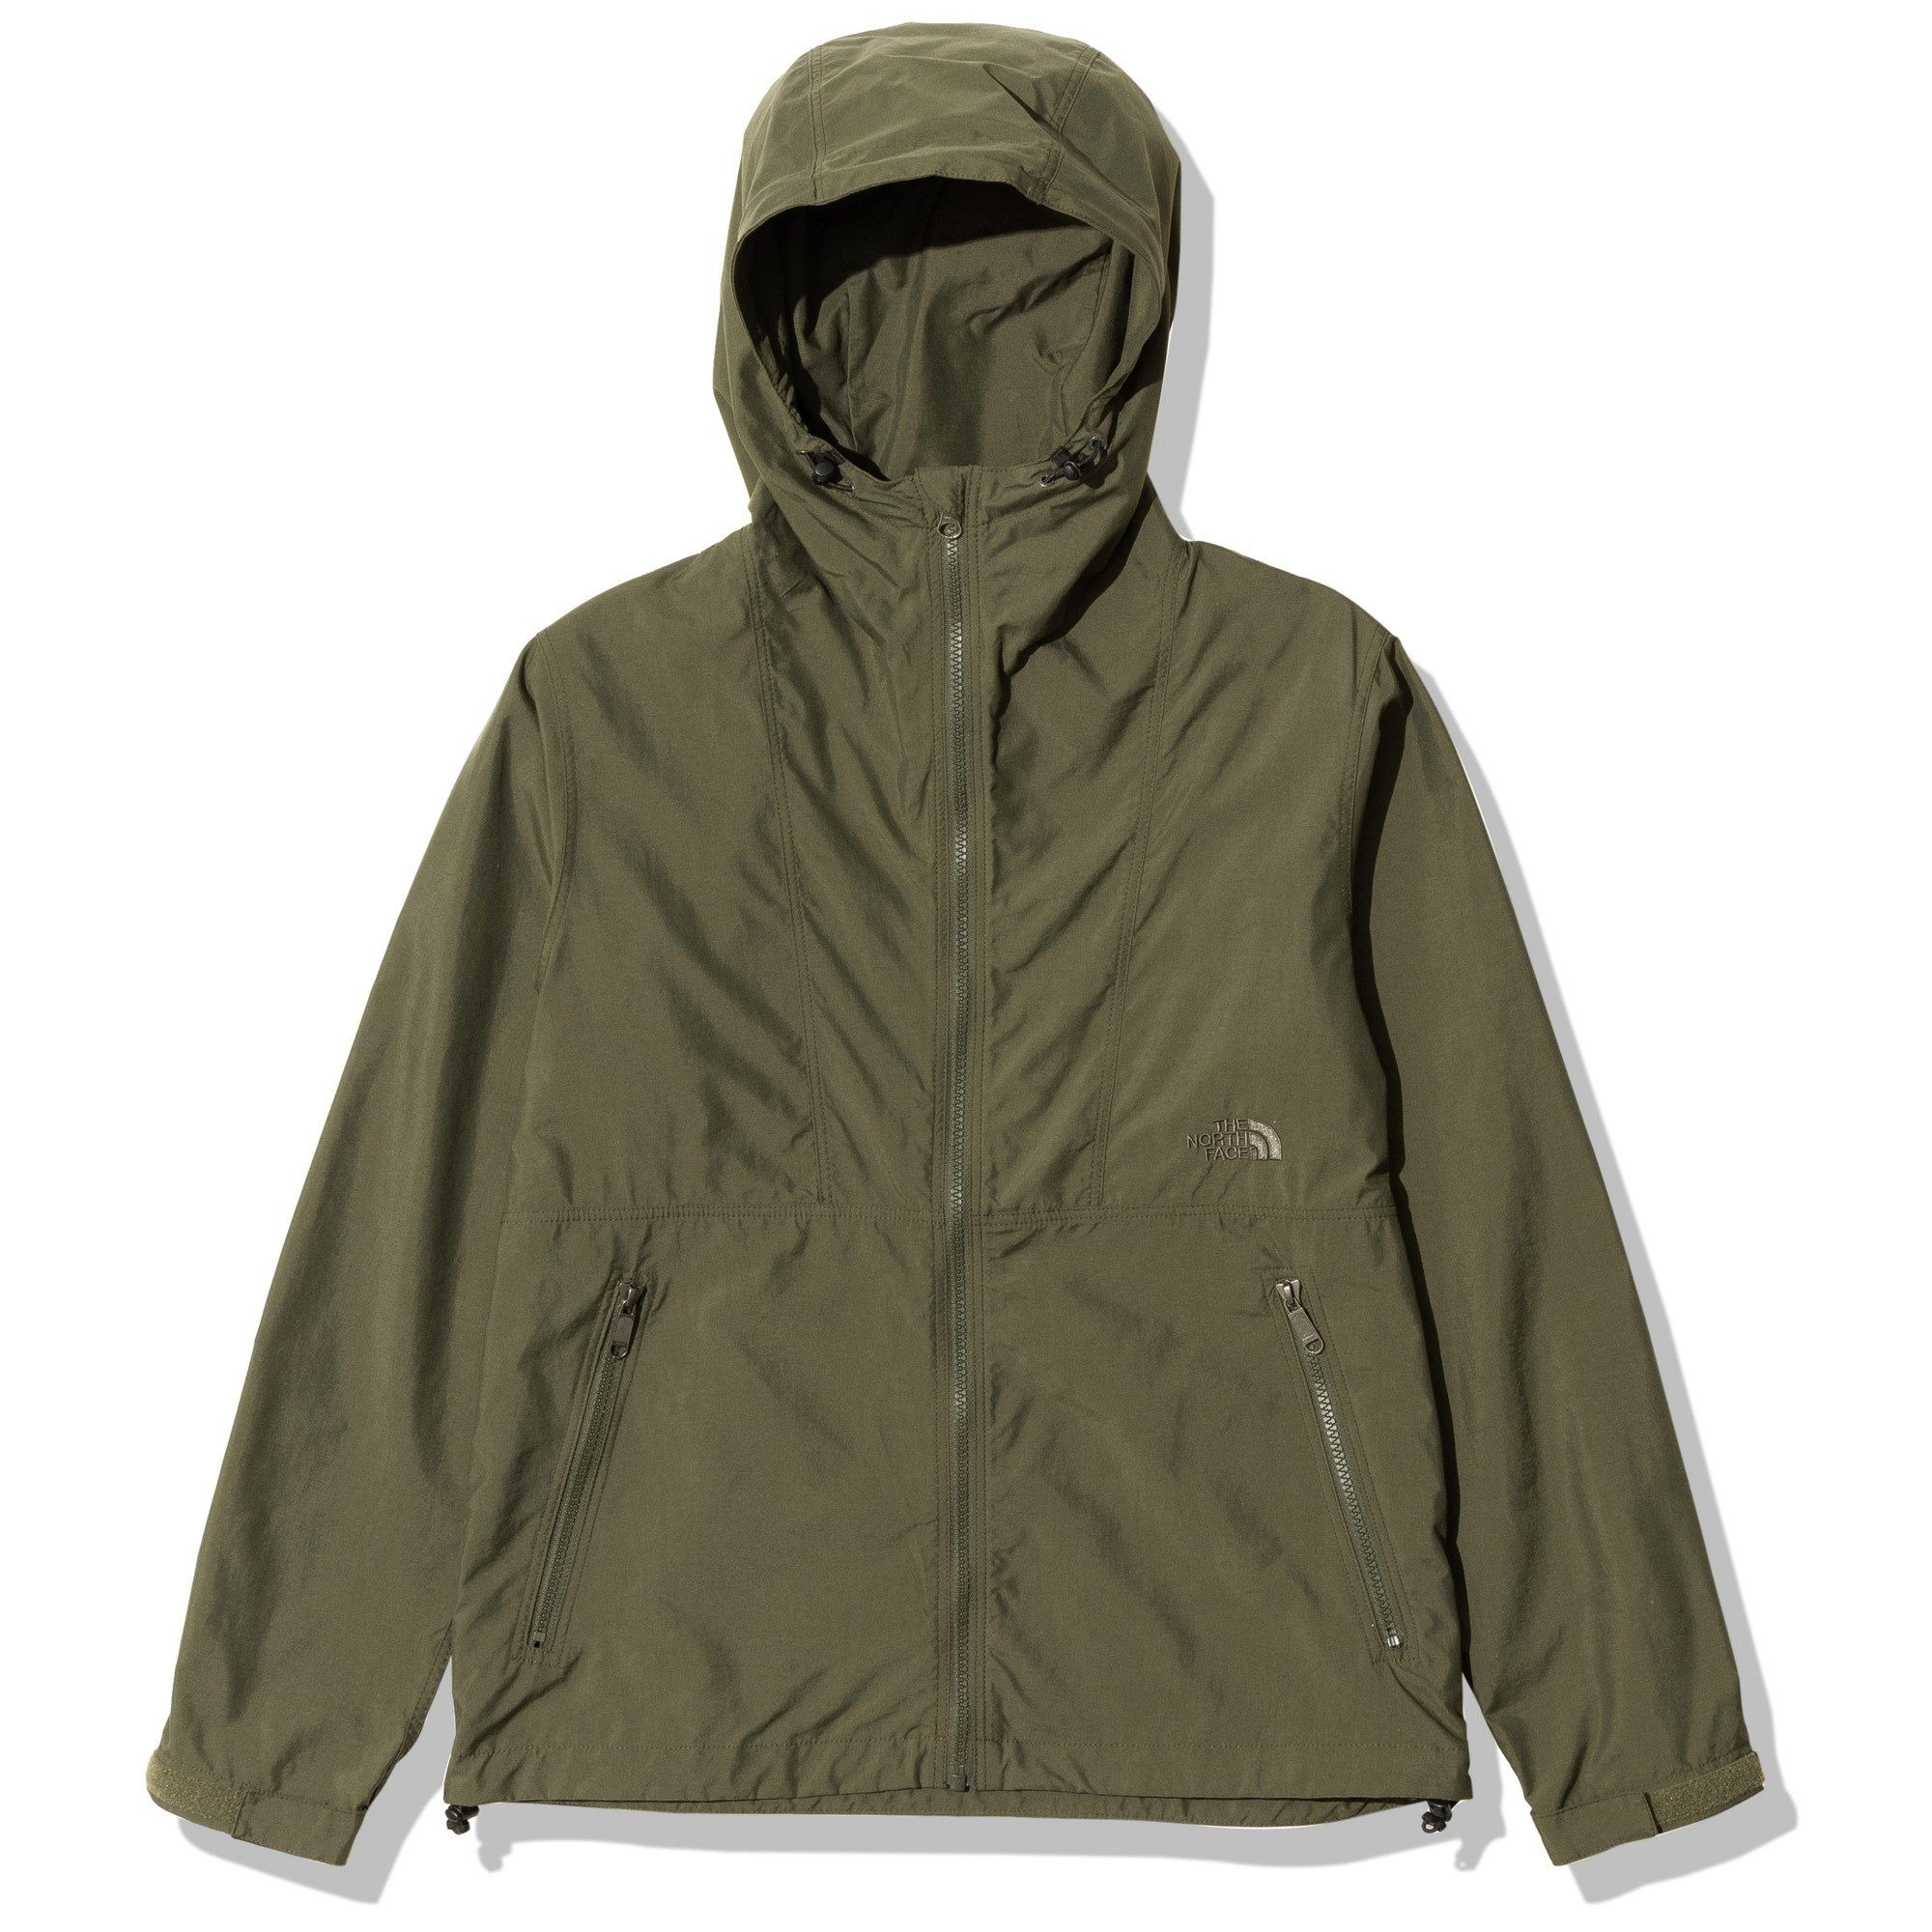 NPW72230 日本THE NORTH FACE COMPACT JACKET 連帽外套